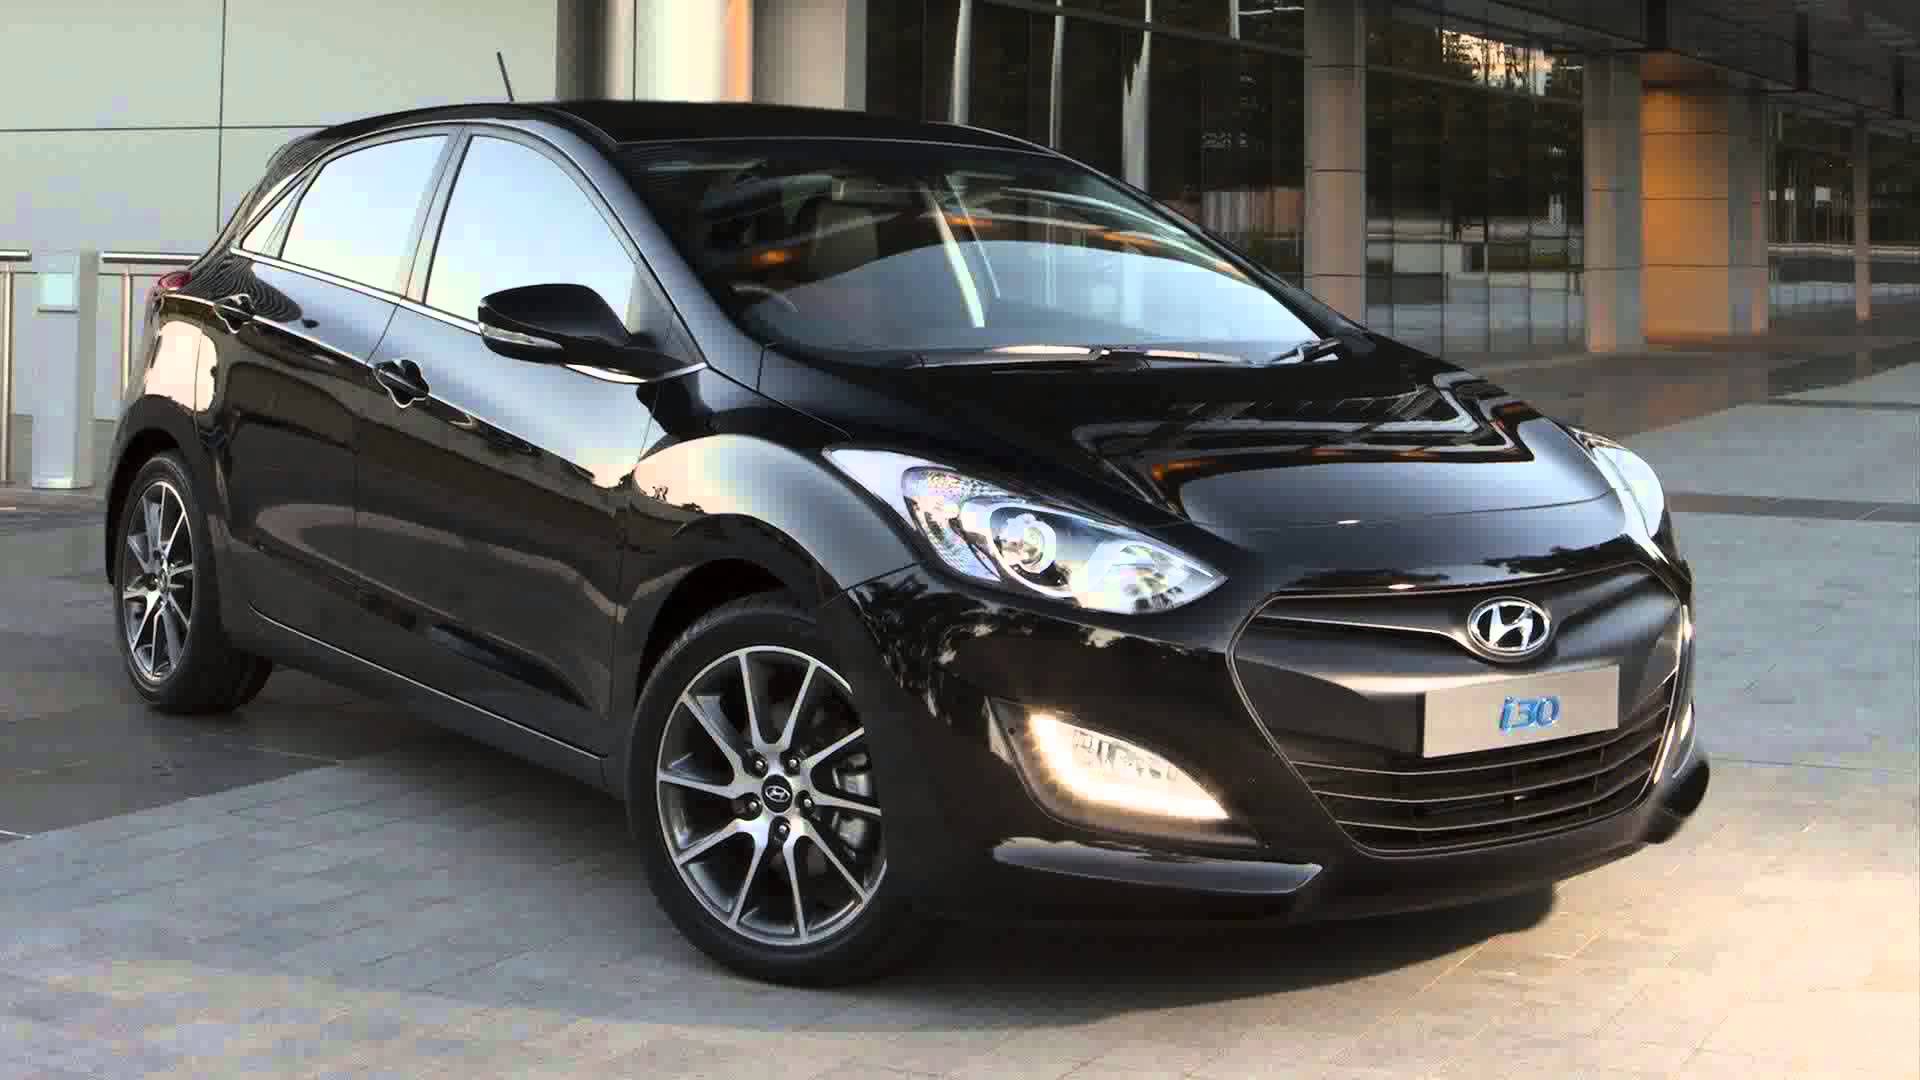 Hyundai I30 2014 Review, Amazing Pictures and Images